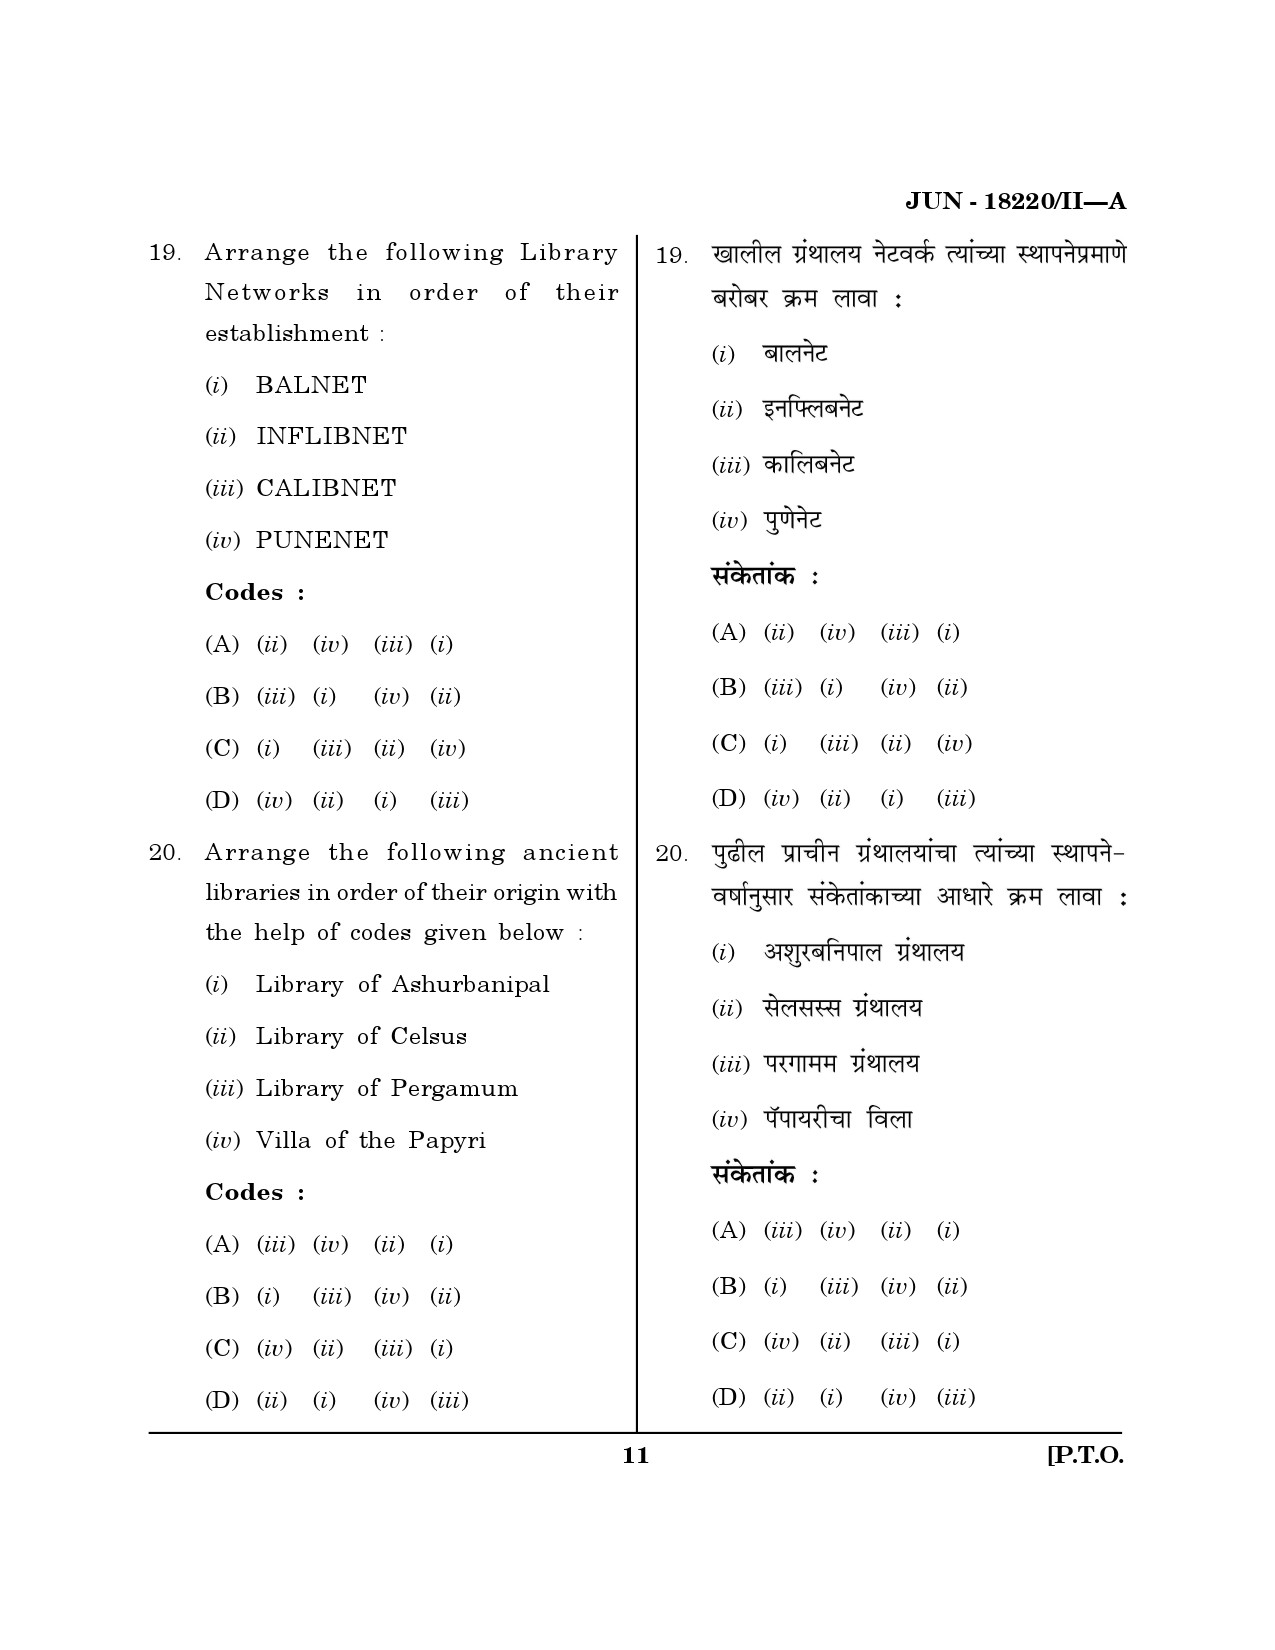 Maharashtra SET Library Information Science Question Paper II June 2020 10